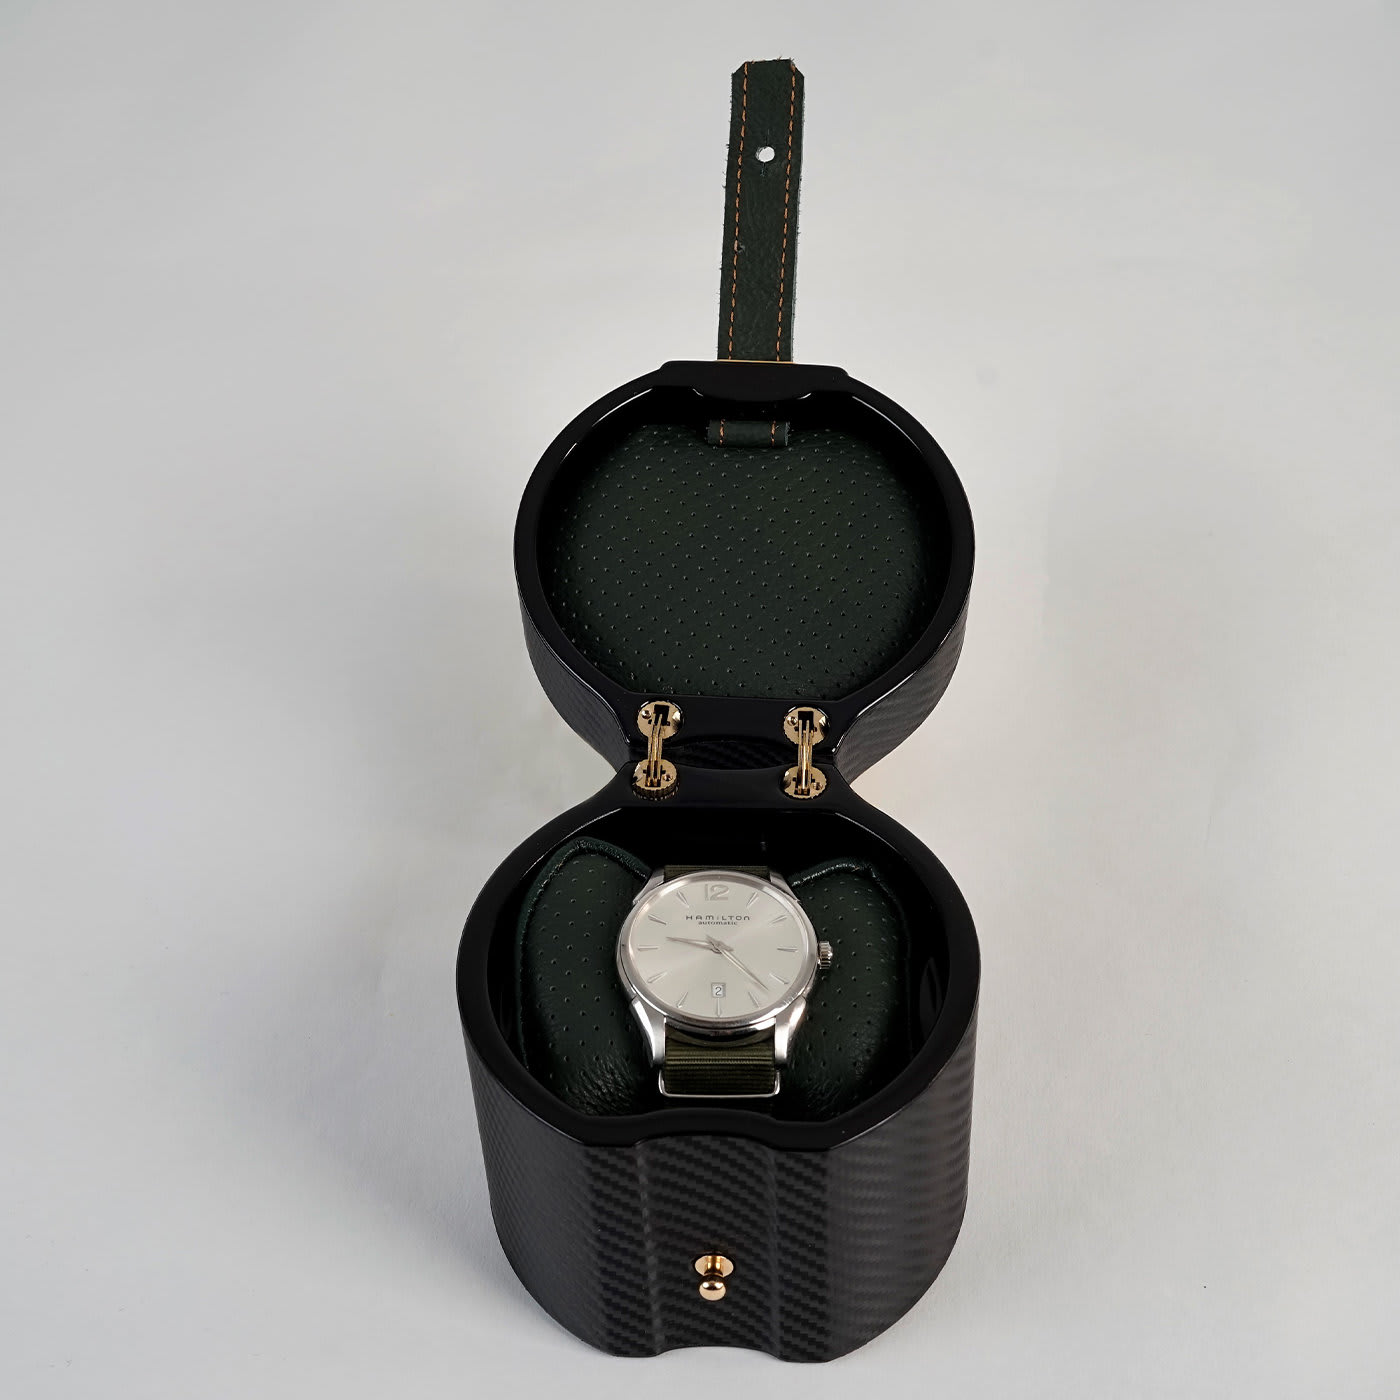 MT Travel Black and Green Watch Case - Maurizio Time